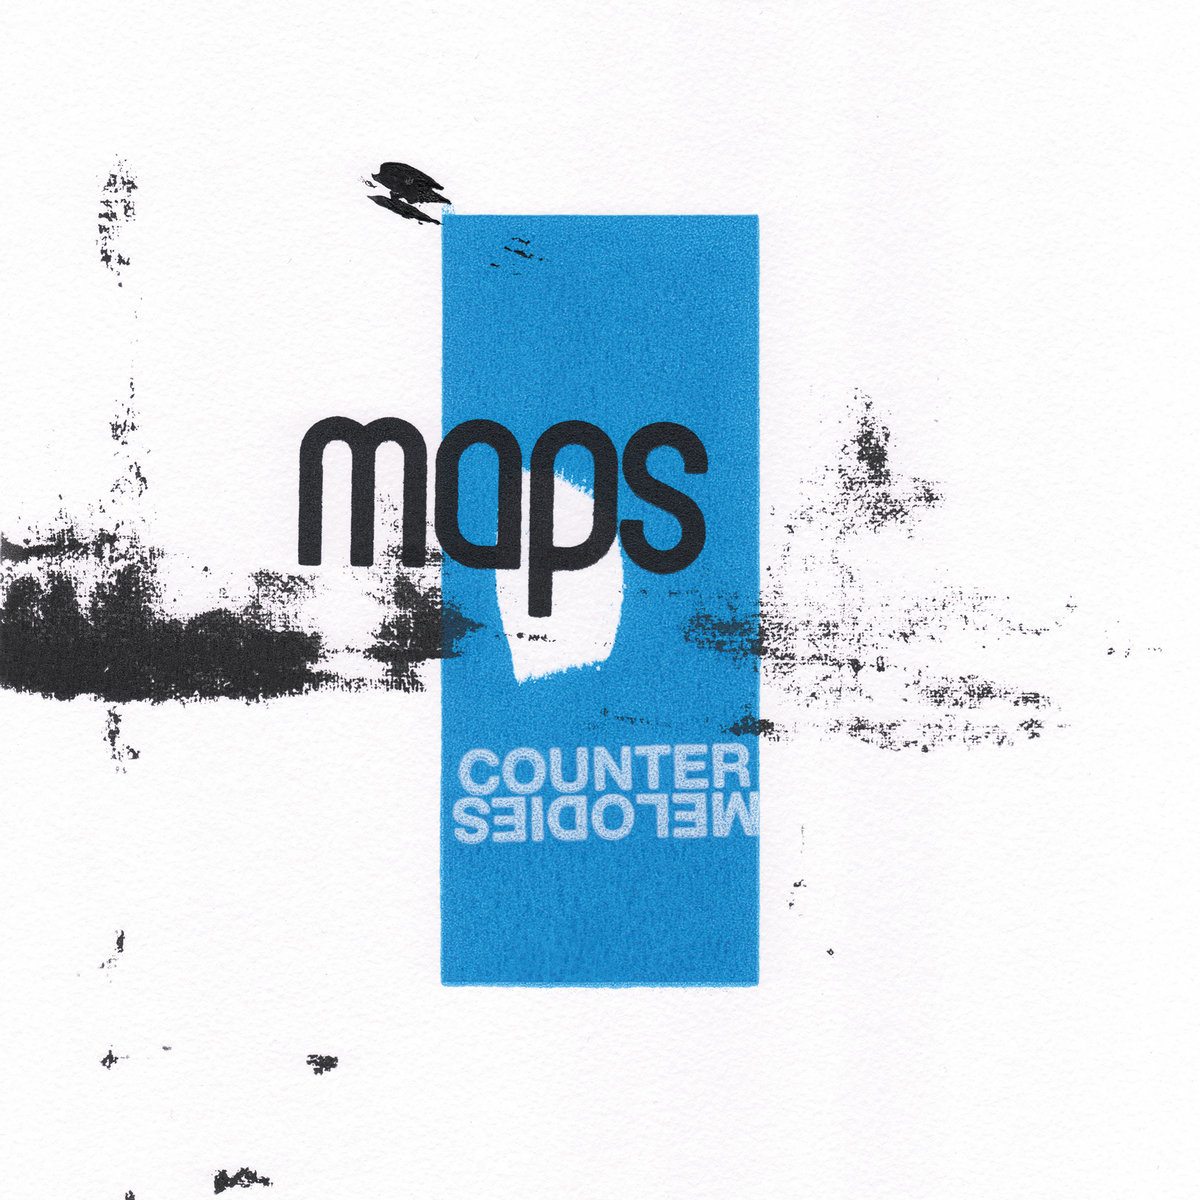 Electro News @ – Maps – Counter Melodies